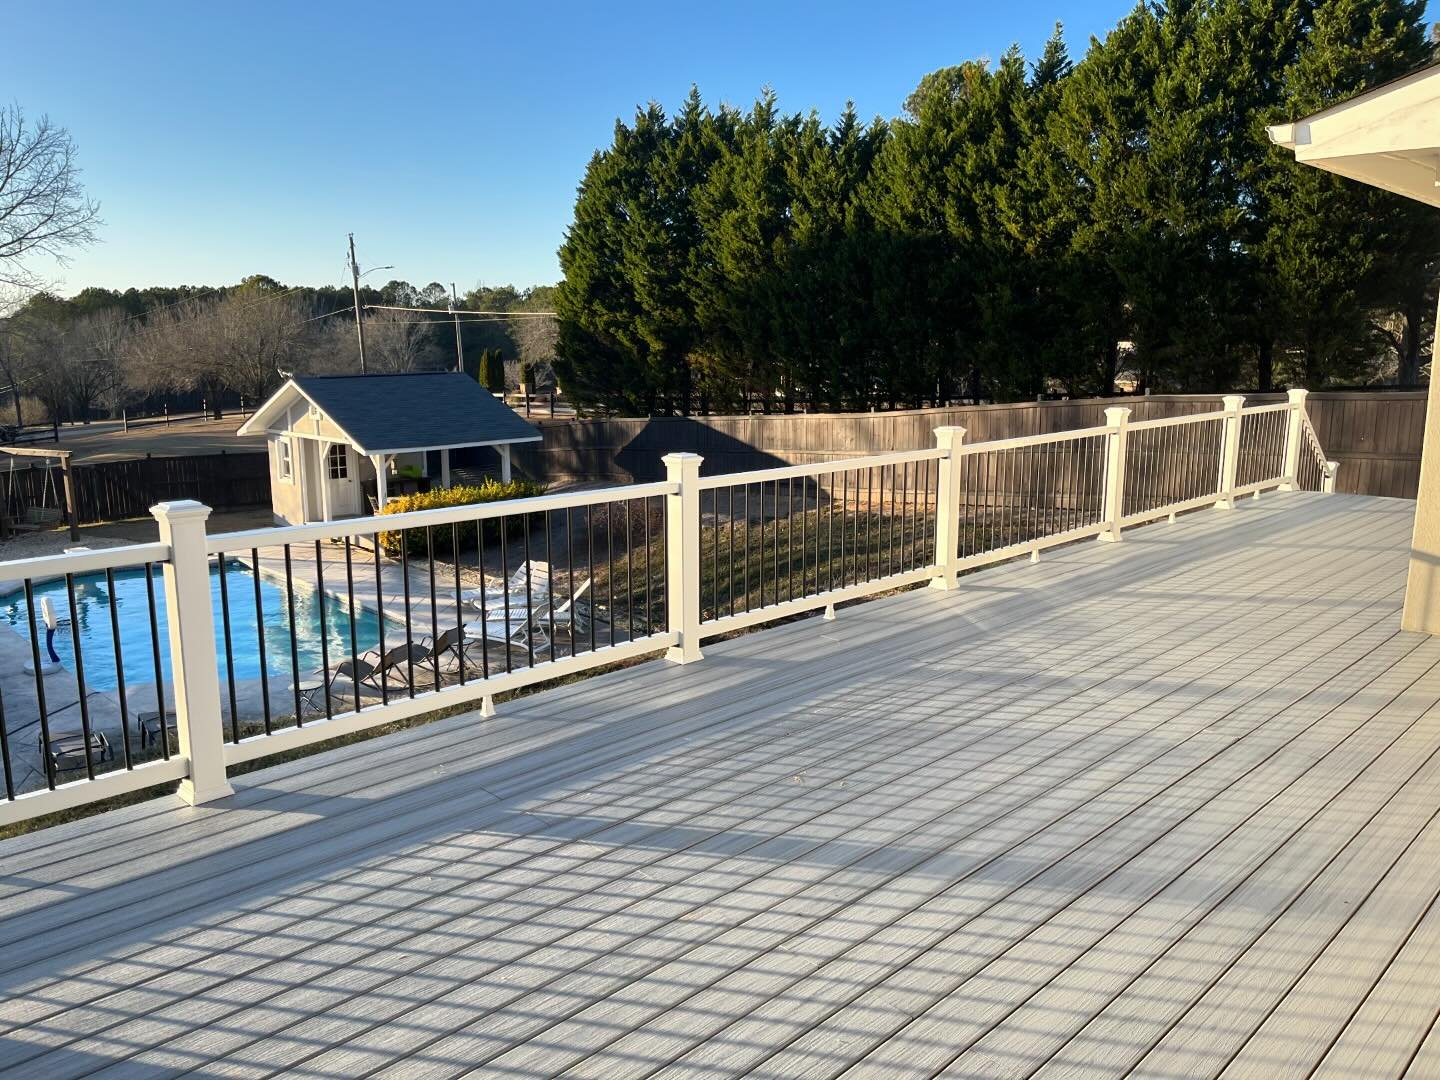 Featuring Island Mist Trex Decking, Available to Order Now 🏝️

Did you know Trex is made from reused and repurposed materials destined for landfills? Come in today or give us a call at 770-779-8988 to learn more about our Trex decking options!